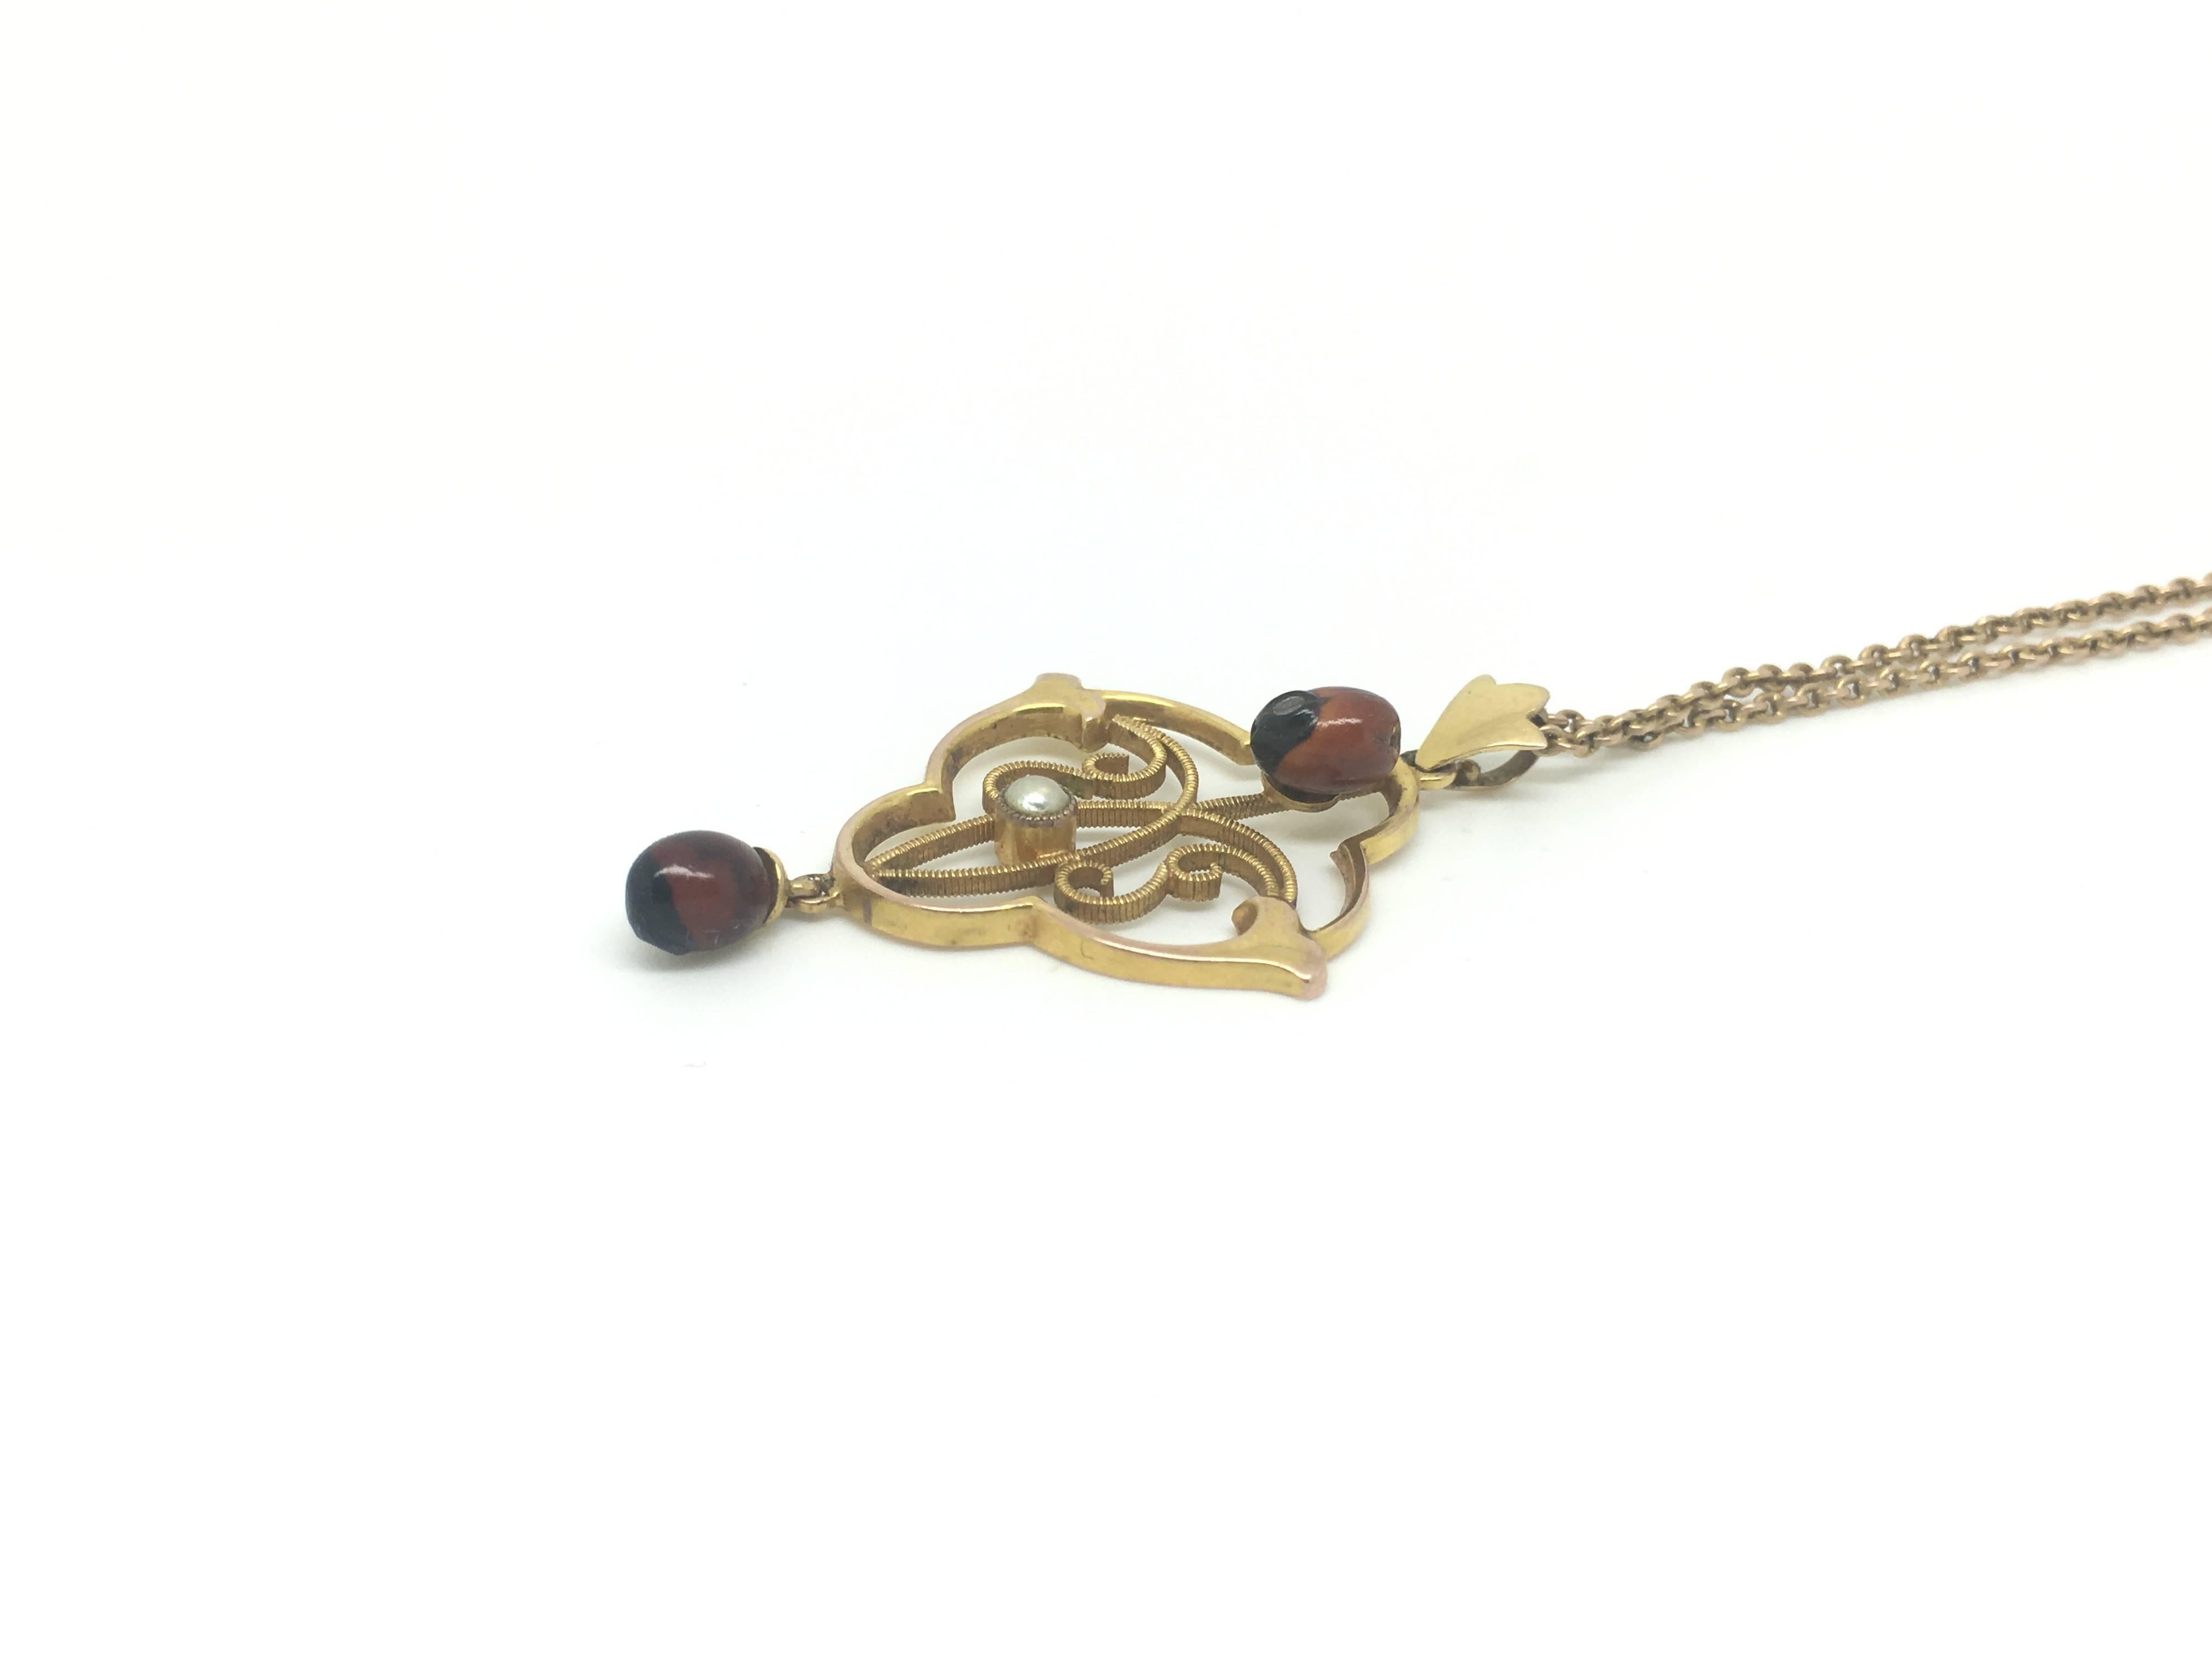 This highly unusual necklace features a pendant set with two Jequirity beans and a small pearl to the center.

The red and black beans look like small ladybirds.

NB makers mark. 9ct gold and date mark for 1910.

9ct gold and date mark for